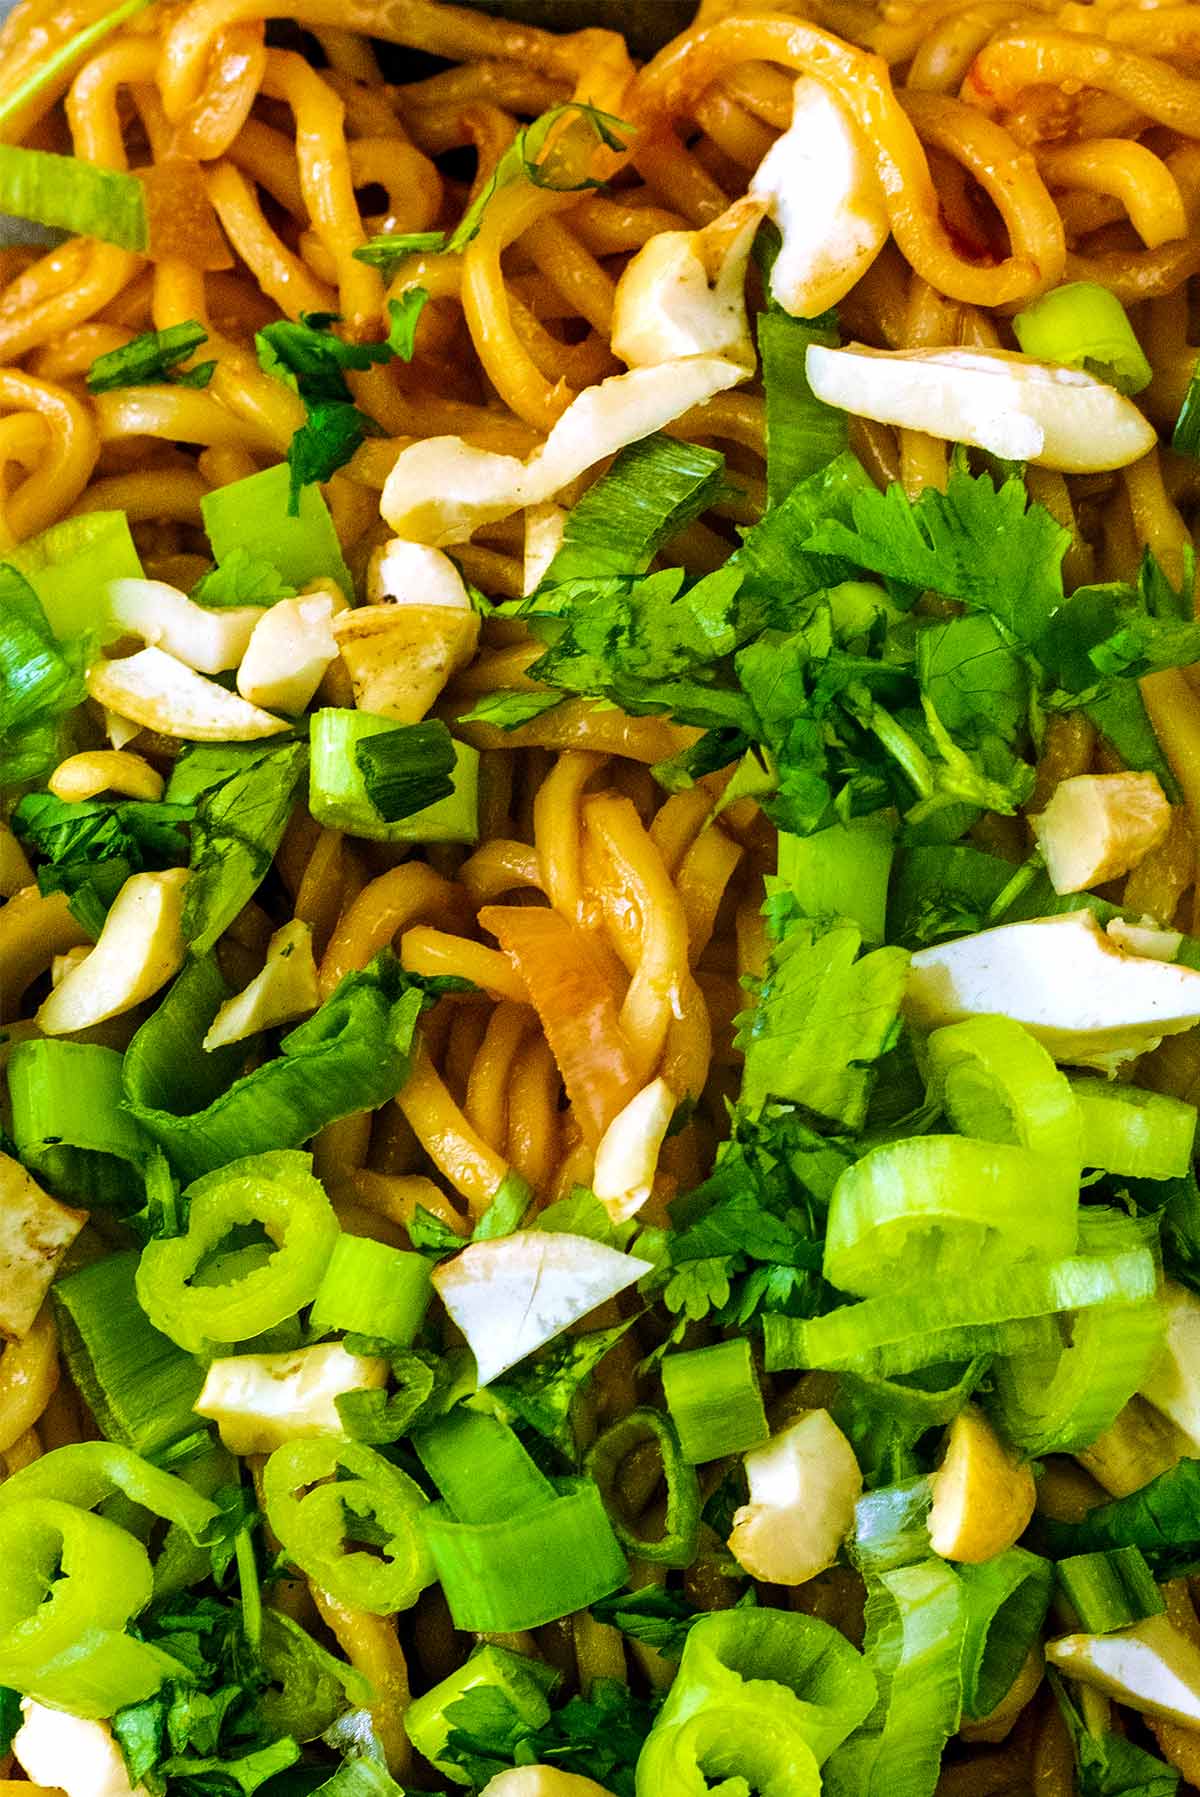 Slices spring onions and chopped cashews on top of some noodles.